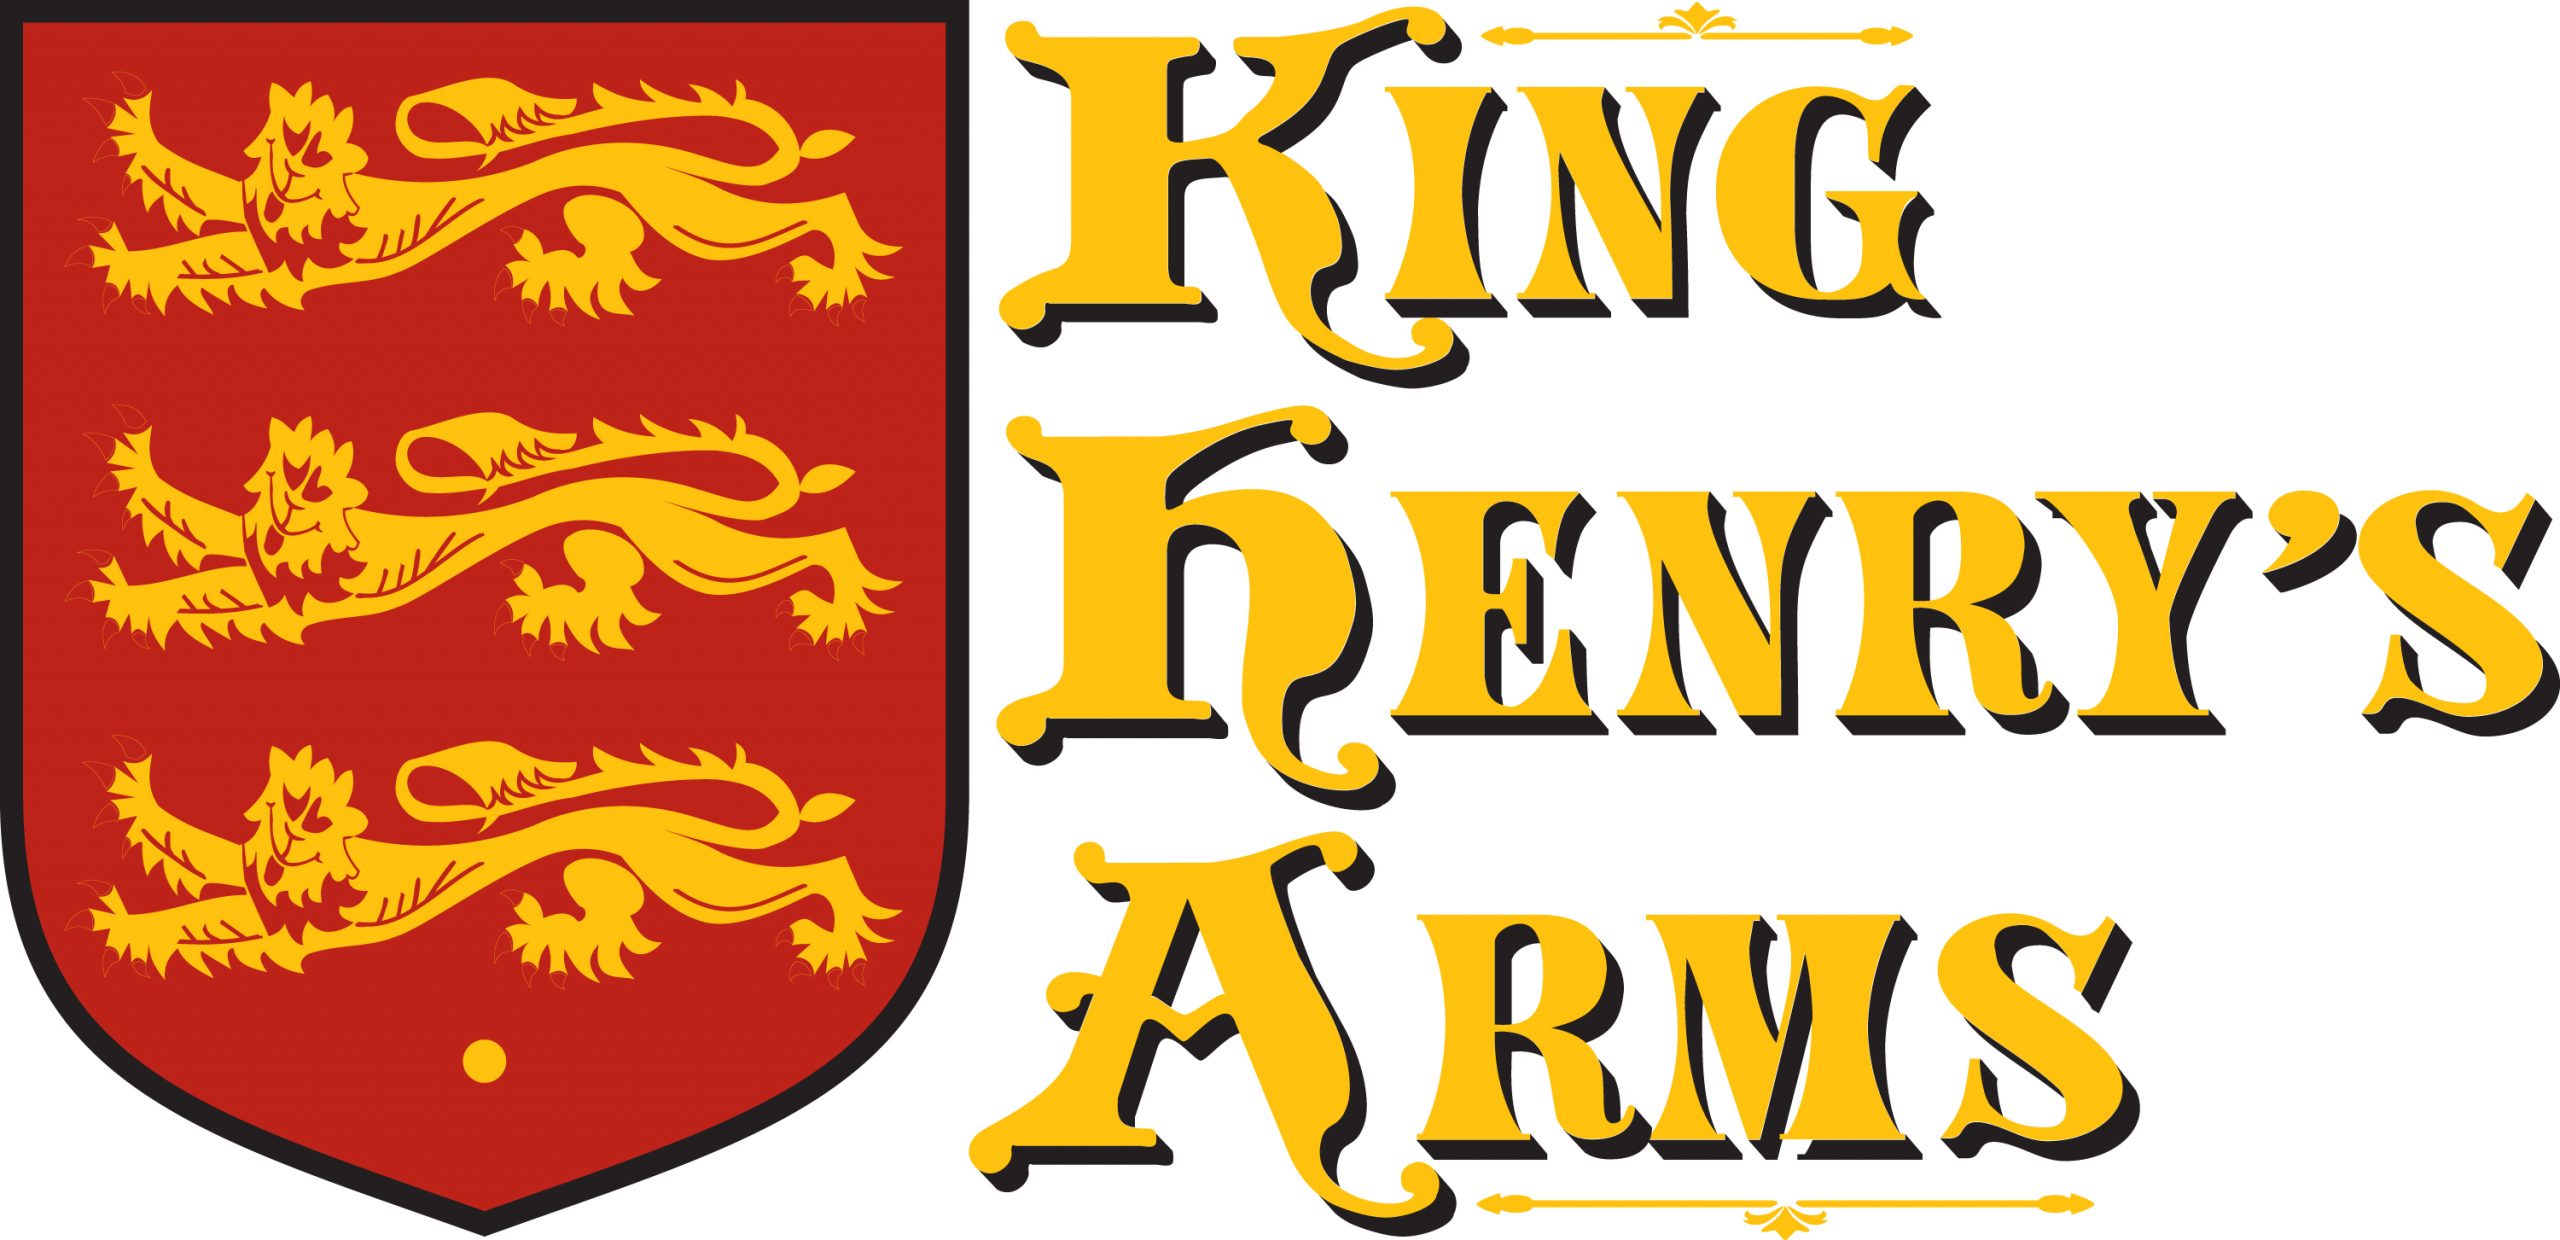 King Henry's Arms